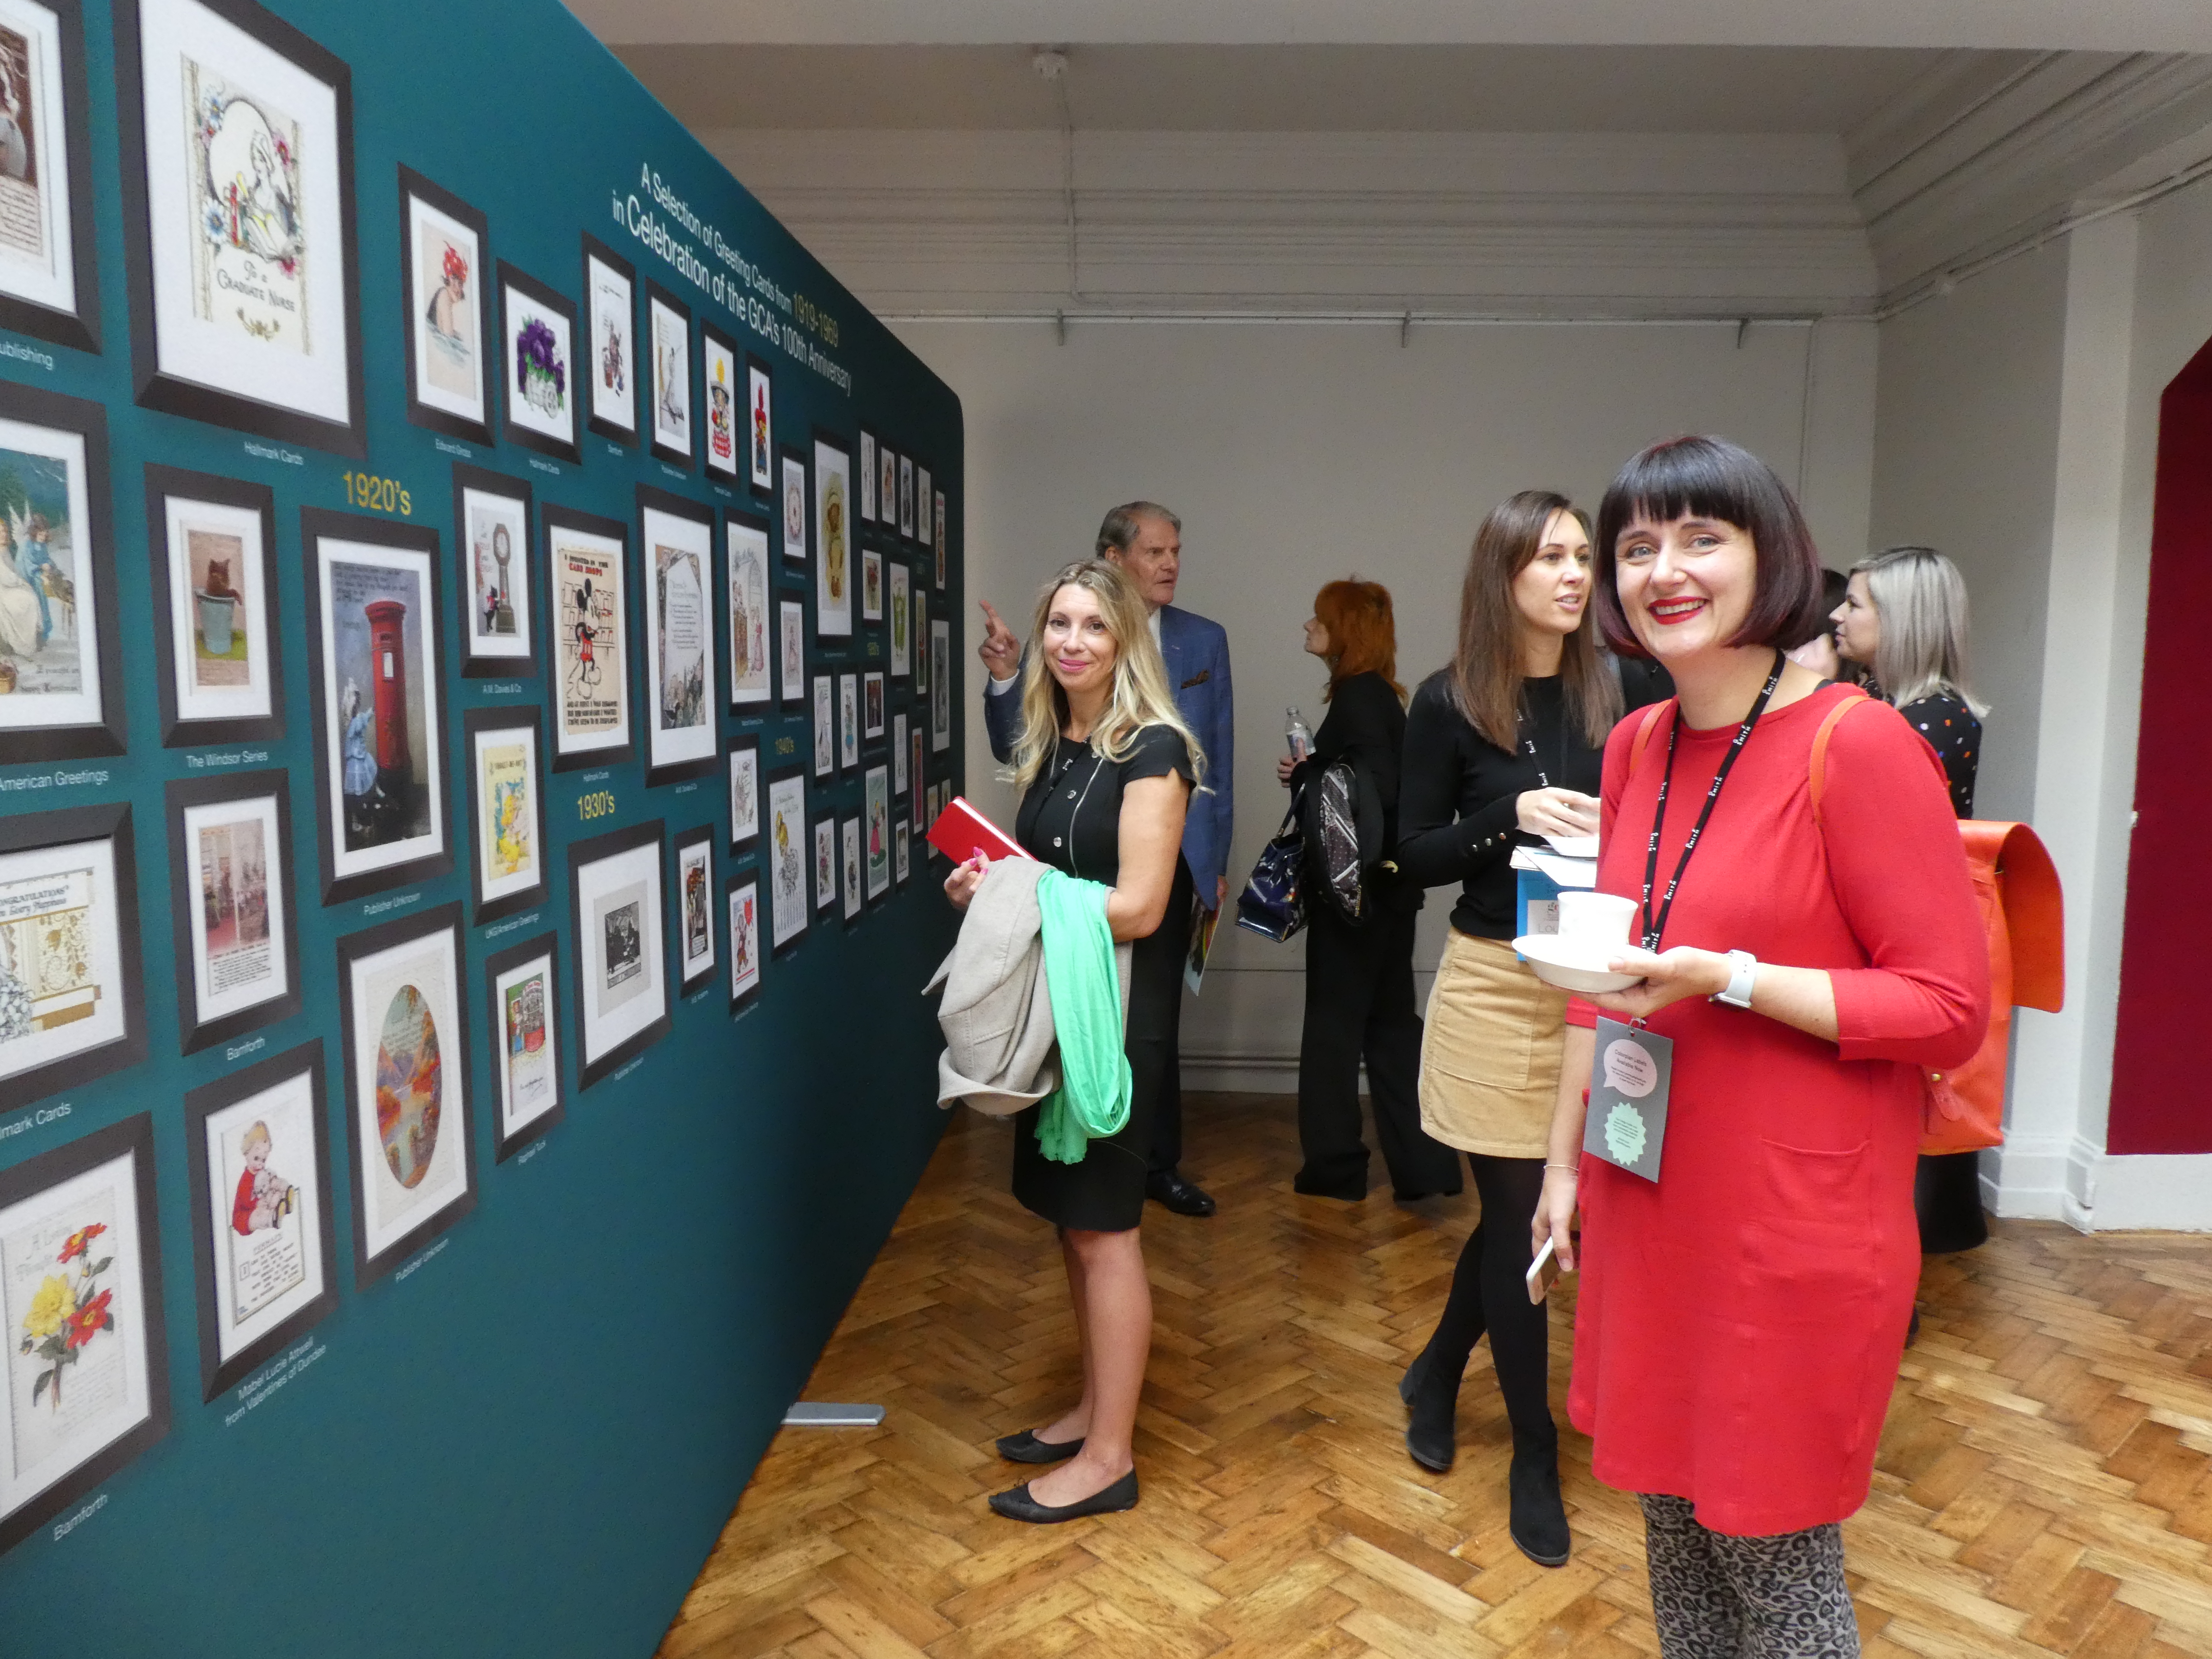 Above: Lizzie Parker (right) and Carte Blanche’s Grace Elphinstone (left) joined others in looking at the exhibition, which is now available to be used by GCA members and other interested parties. 